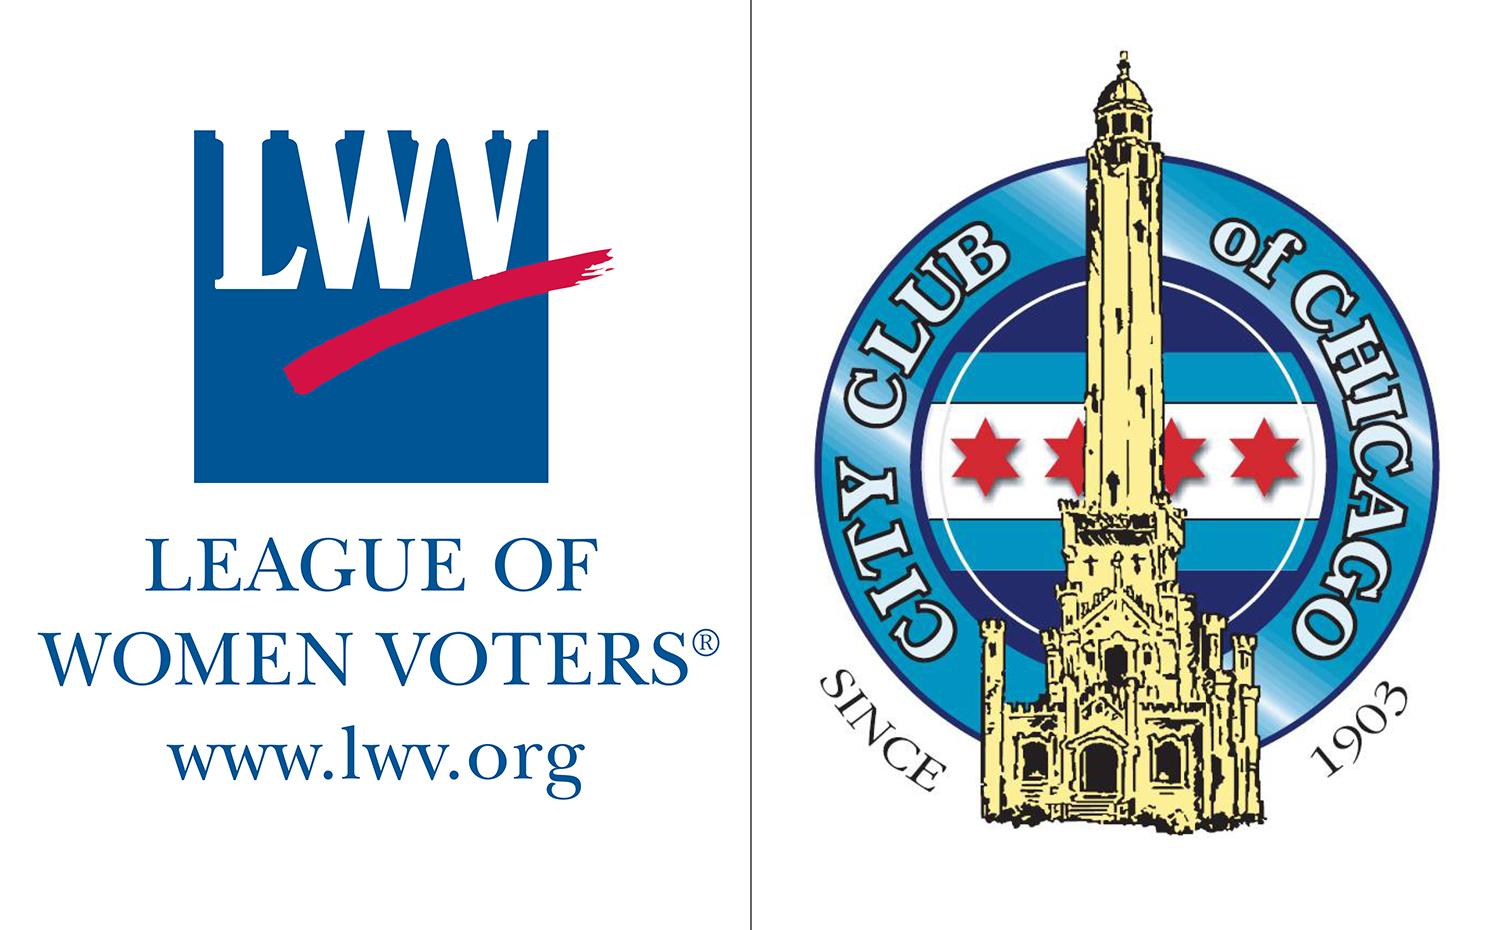 Candidate Free Time is underwritten in part by the League of Women Voters of Cook County and the City Club of Chicago